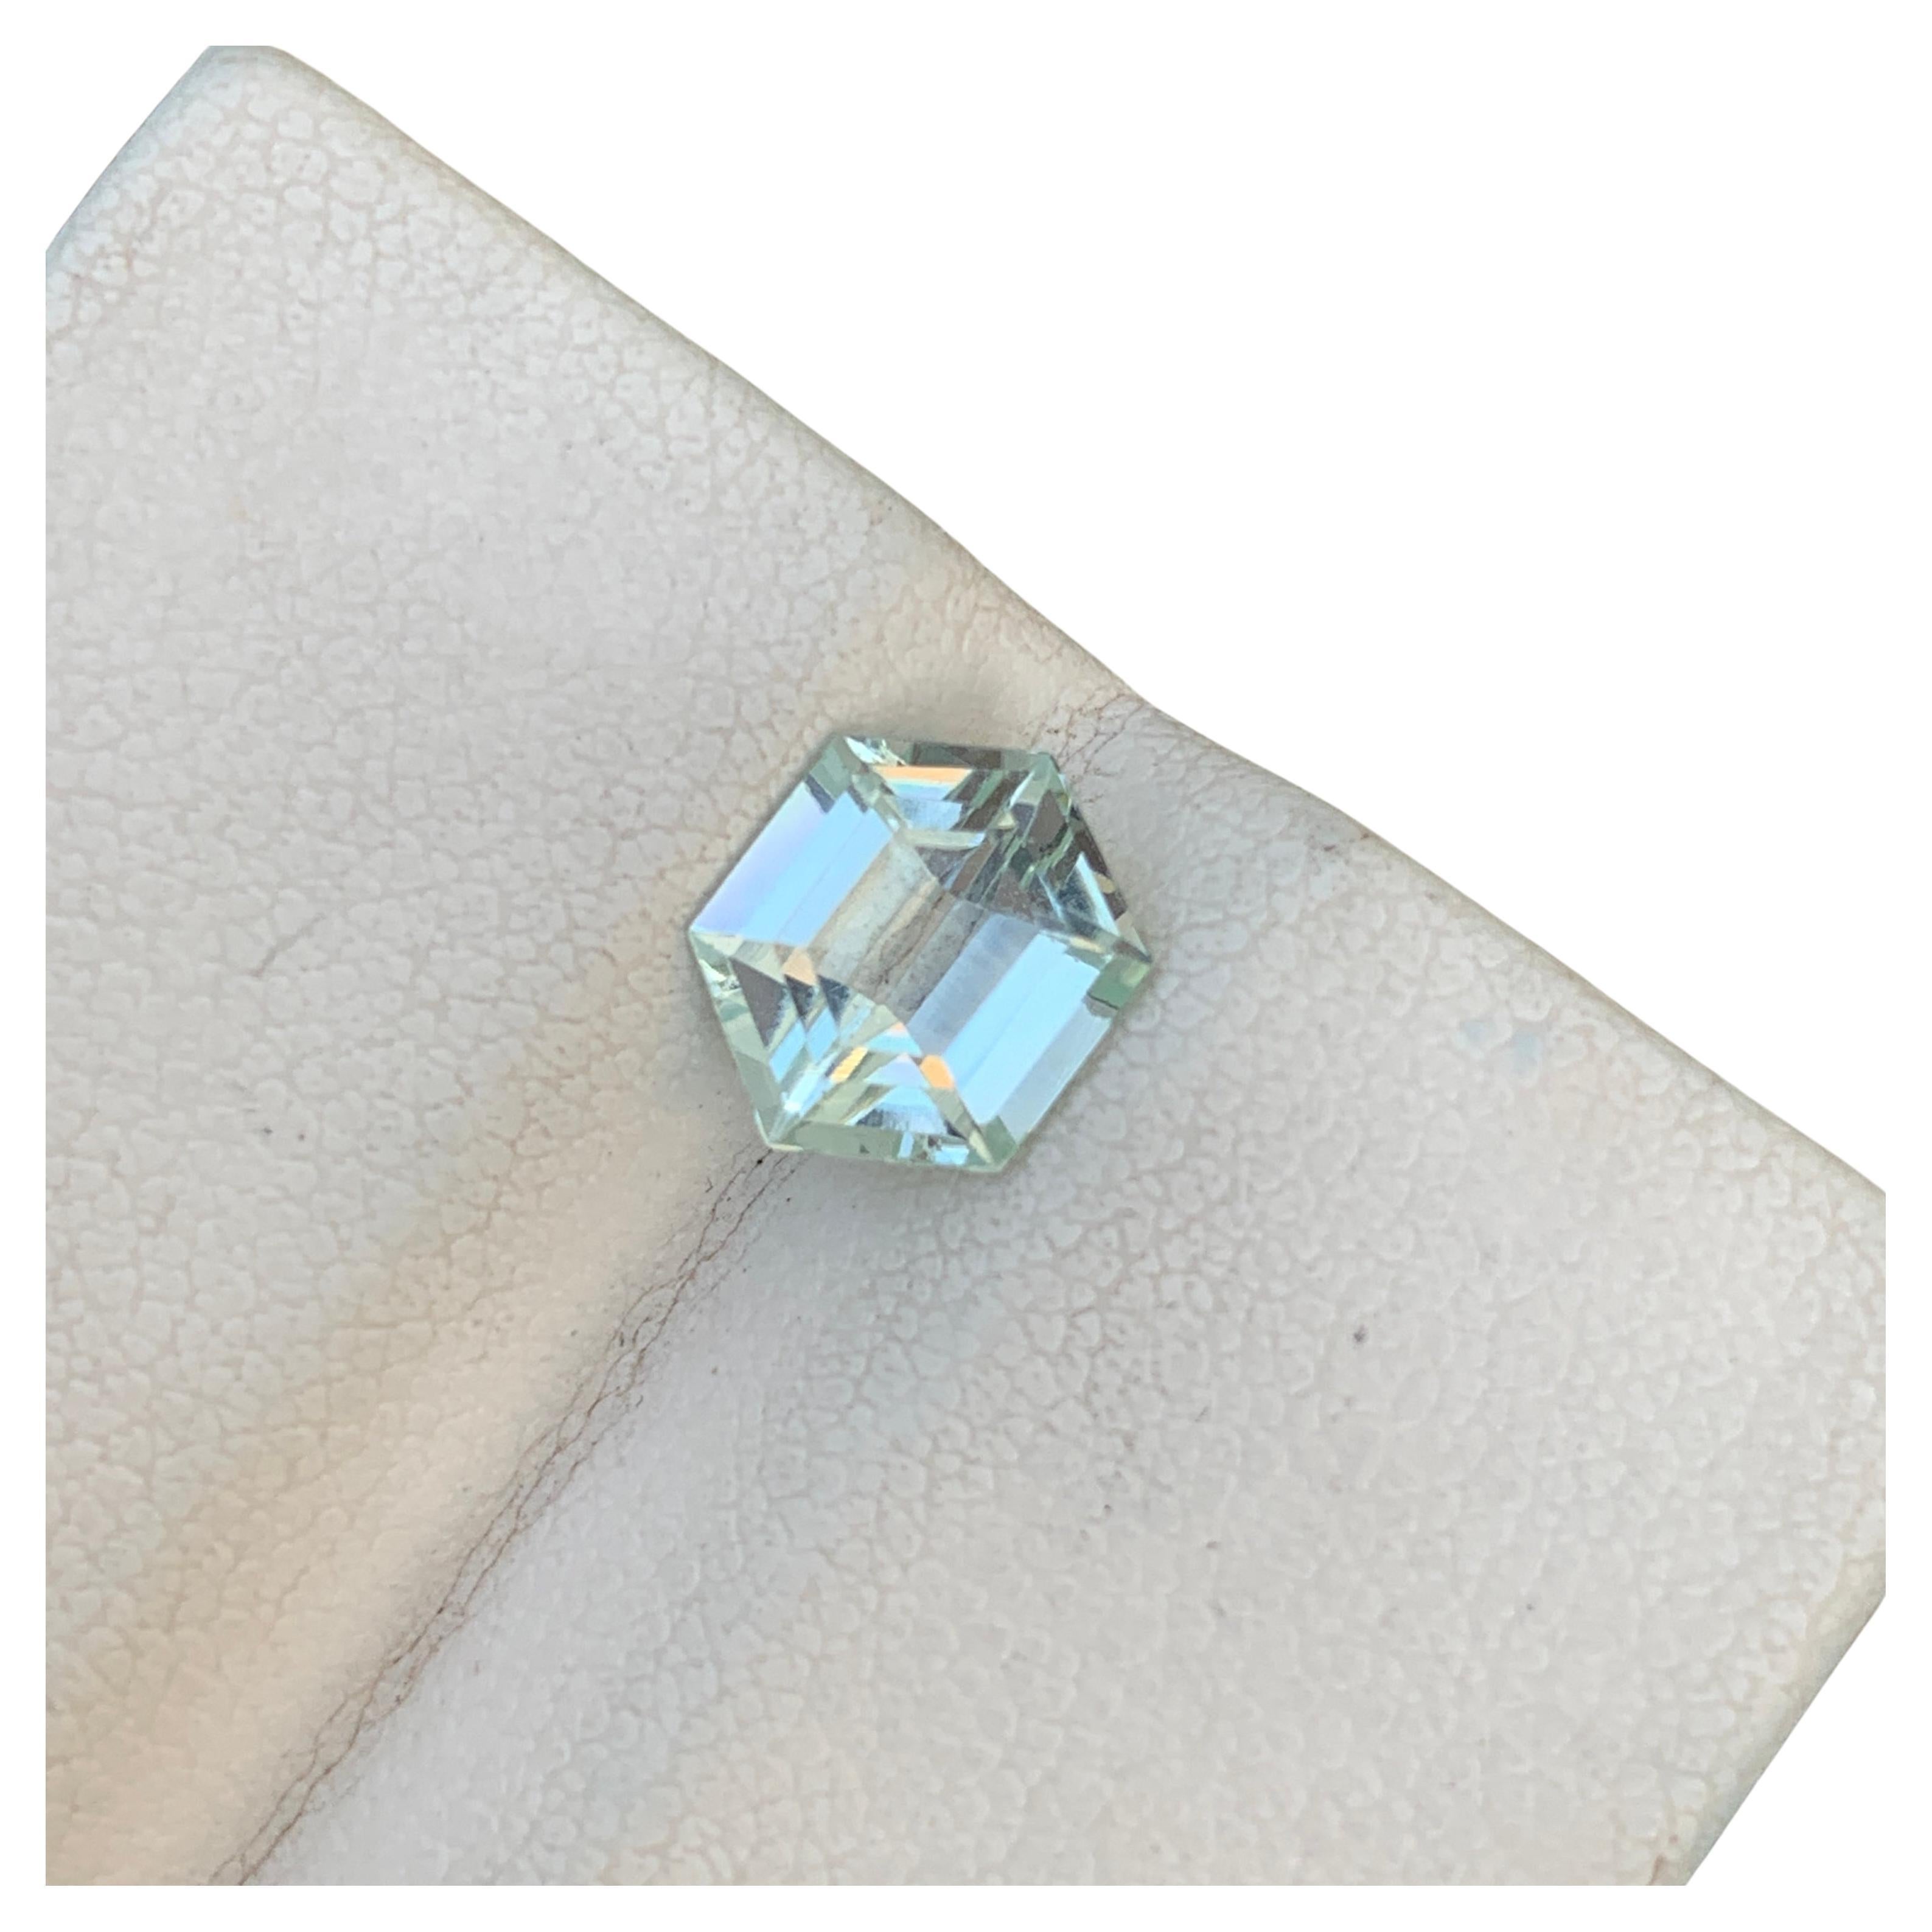 Loose Aquamarine
Weight: 1.50 Carat
Dimension: 8.9 x 7.2 x 3.9 Mm
Colour : Blue and white
Origin: Shigar Valley, Pakistan
Treatment: Non
Certificate : On Demand
Shape: Hexagon 

Aquamarine is a captivating gemstone known for its enchanting